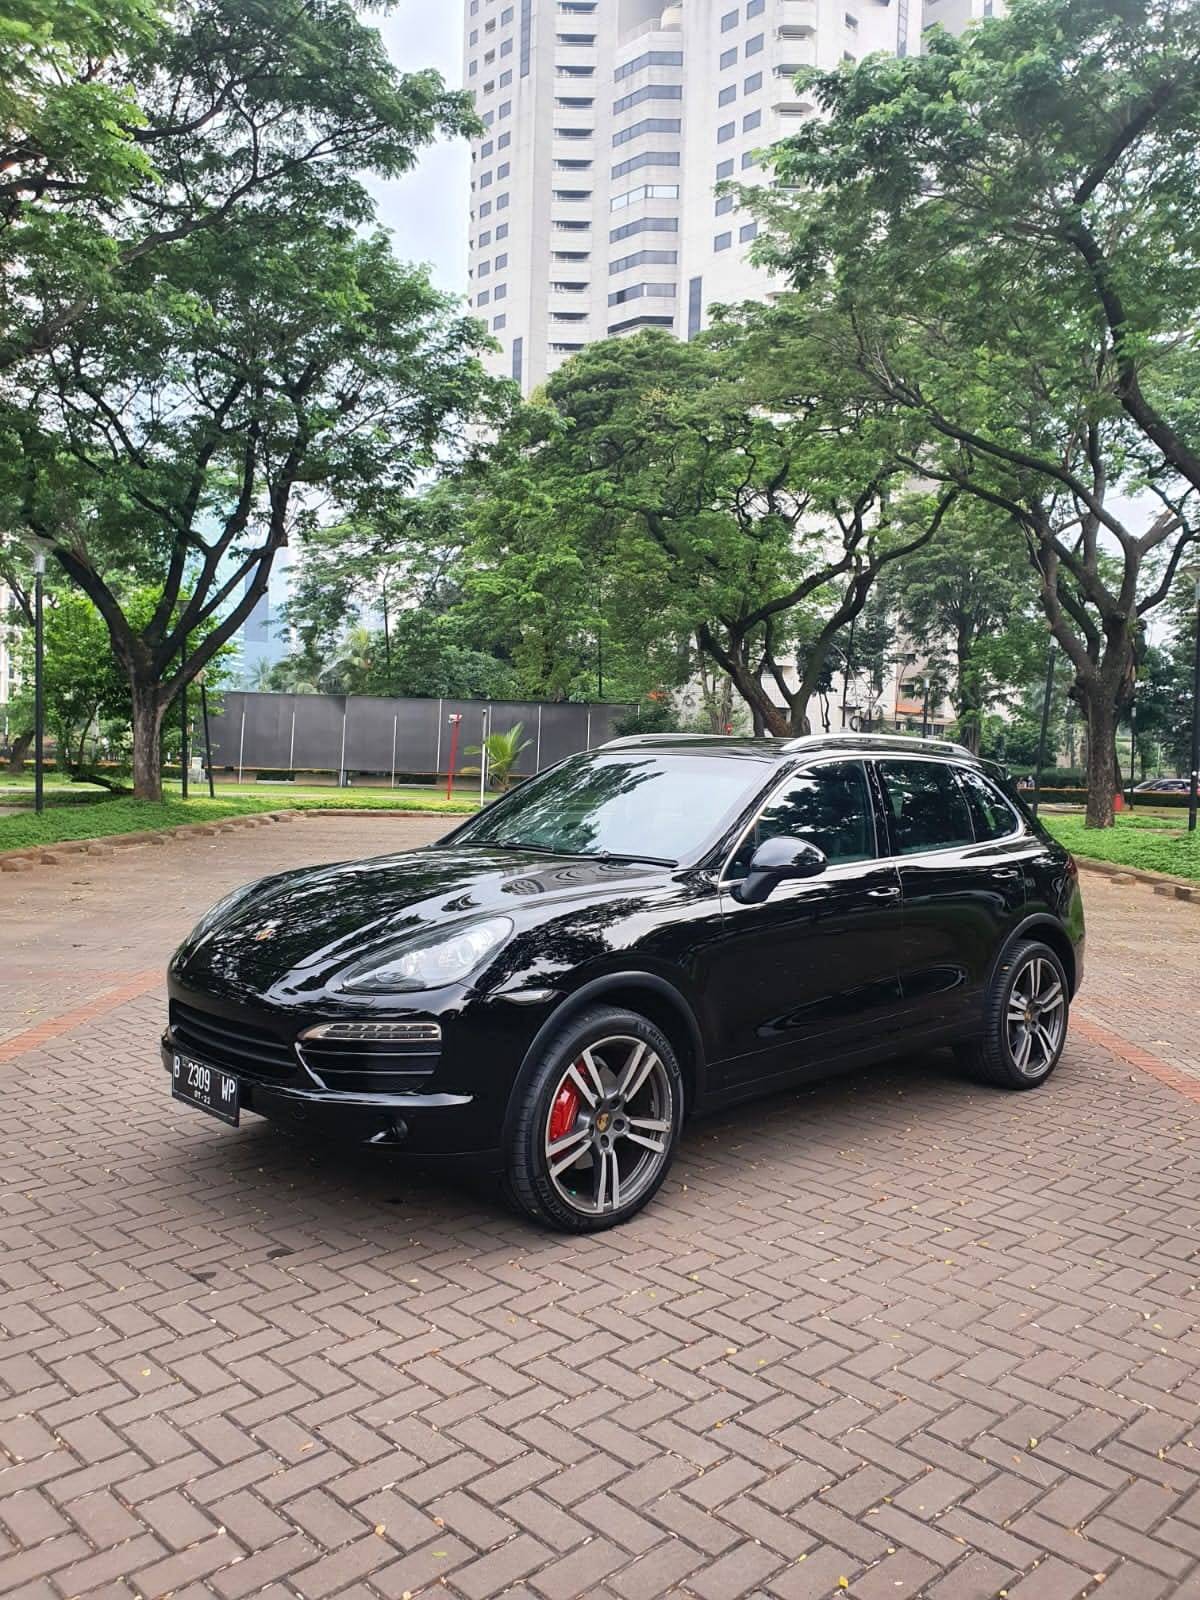 Used 2012 Porsche Cayenne GTS Tiptronic S Tiptronic S for sale